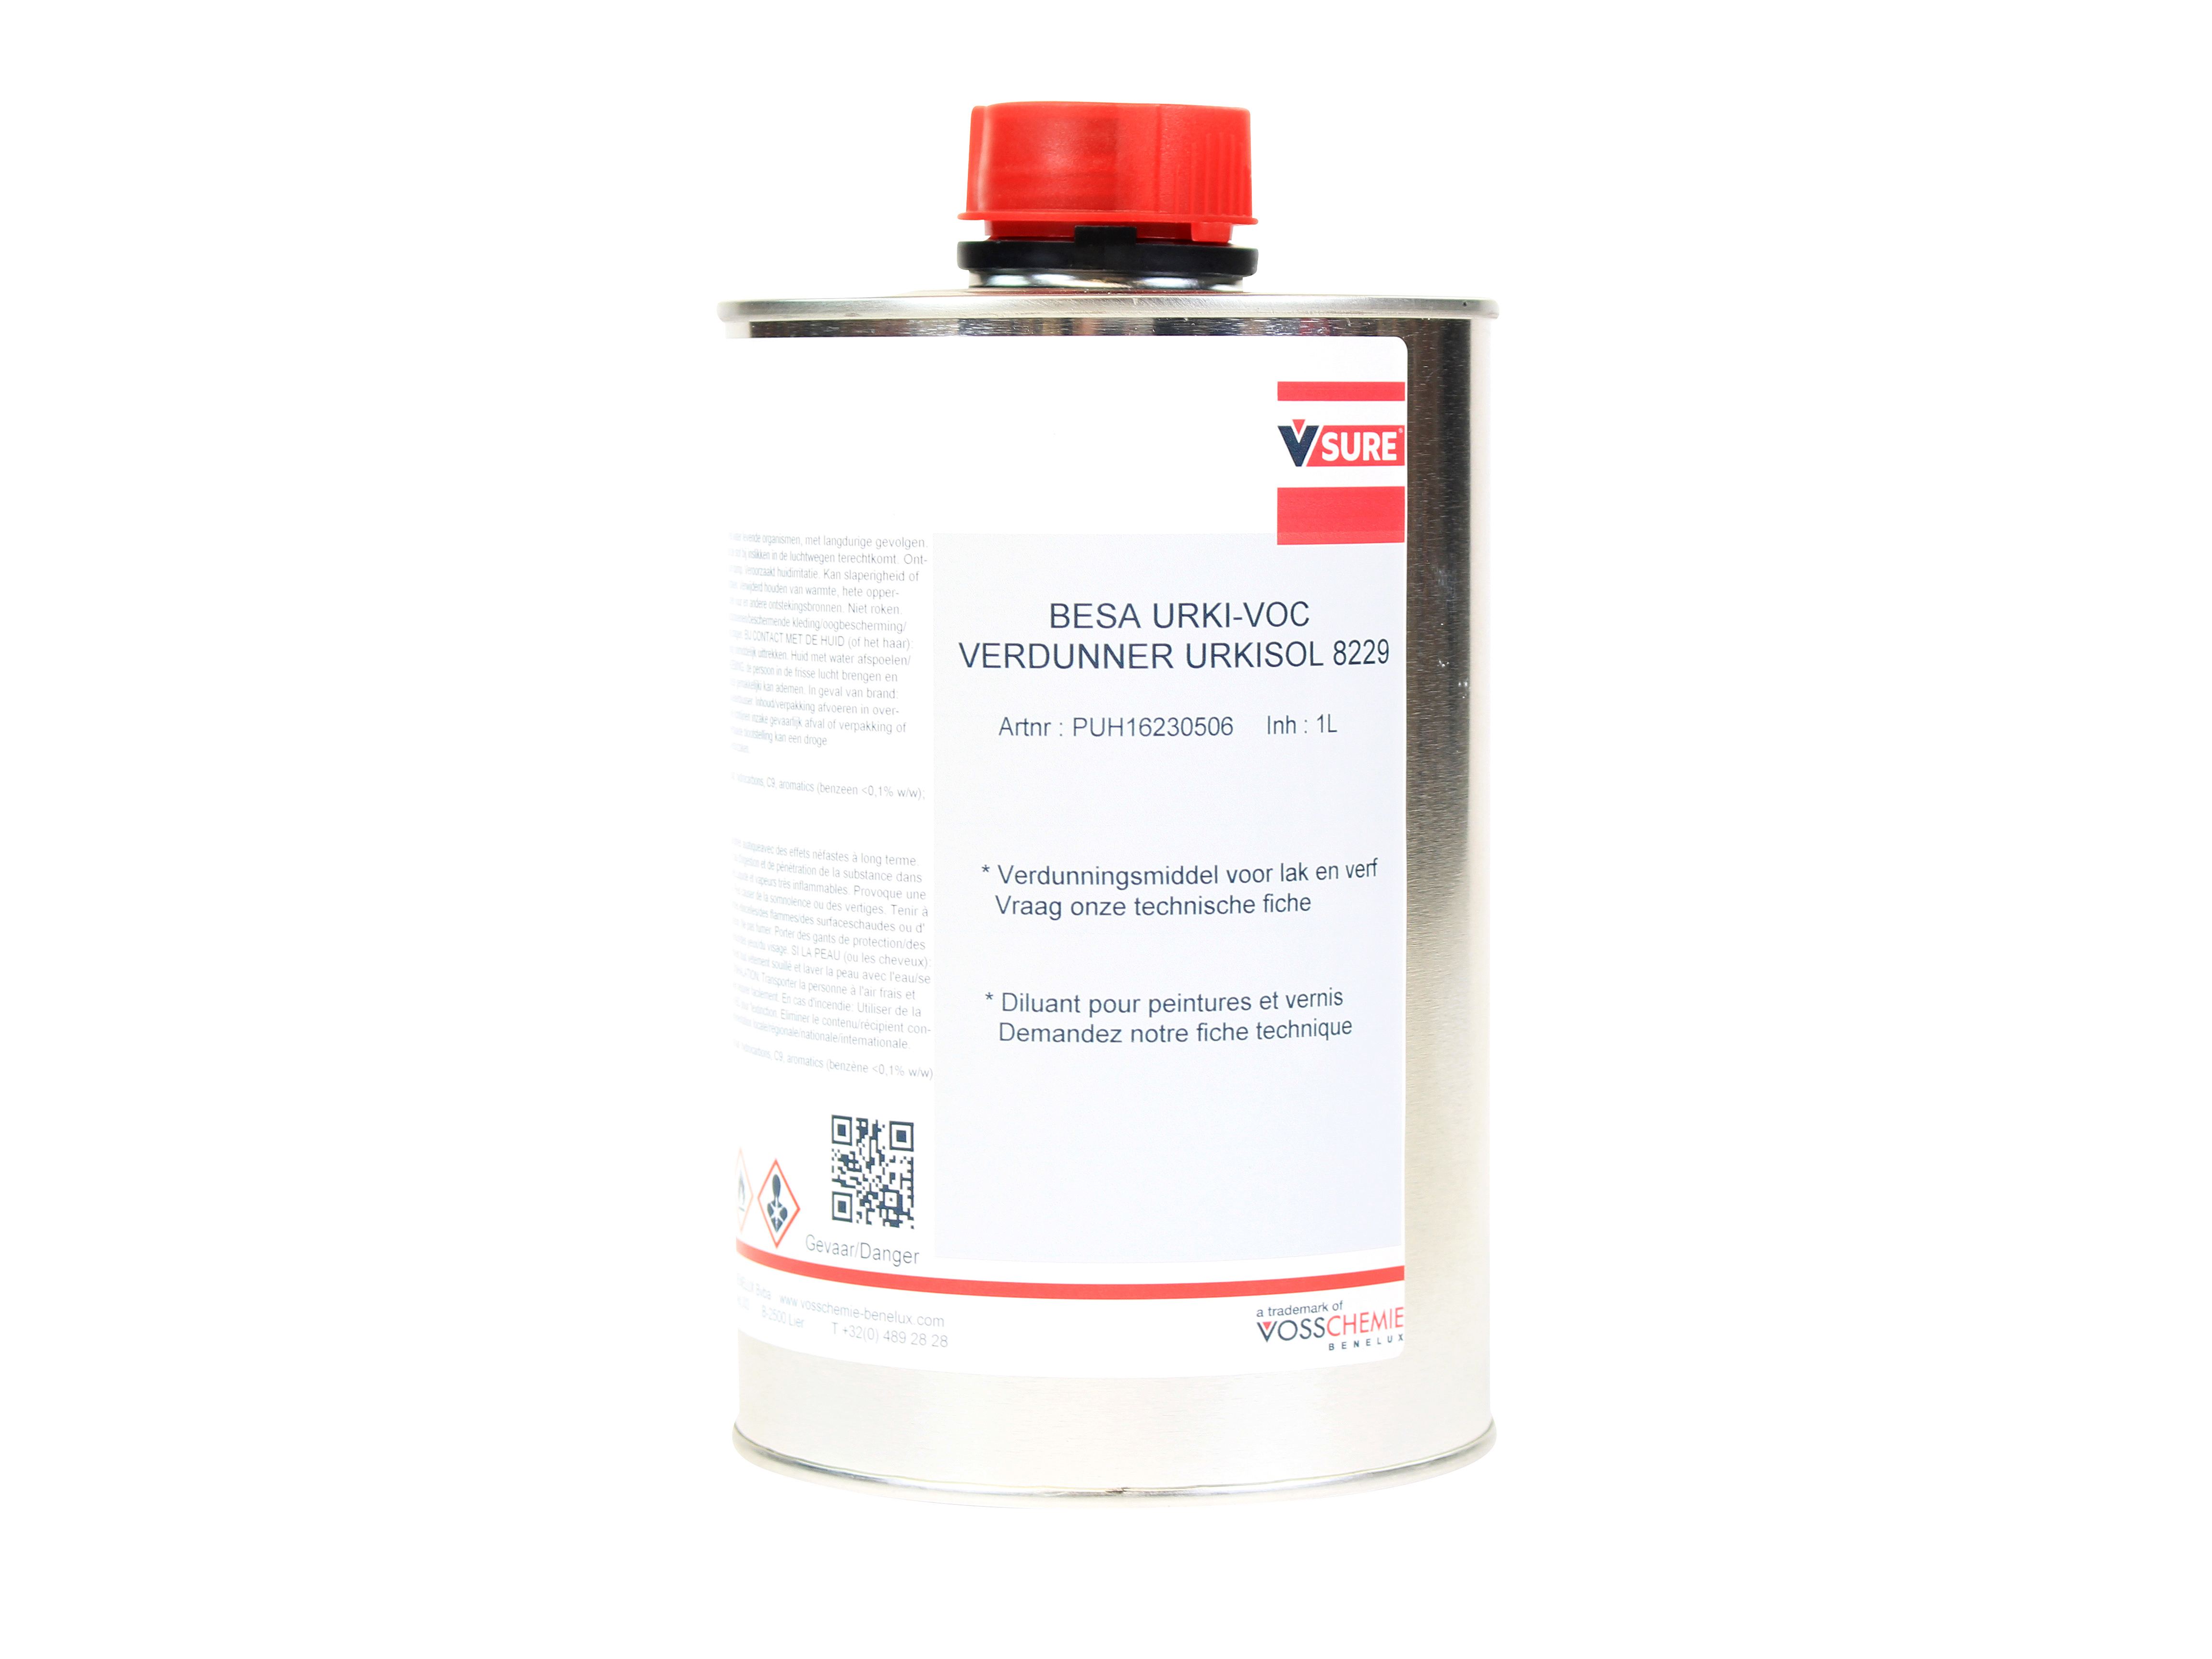 Thinner for durable lacquer paint for wood, glass, plastic and metal - 1 l